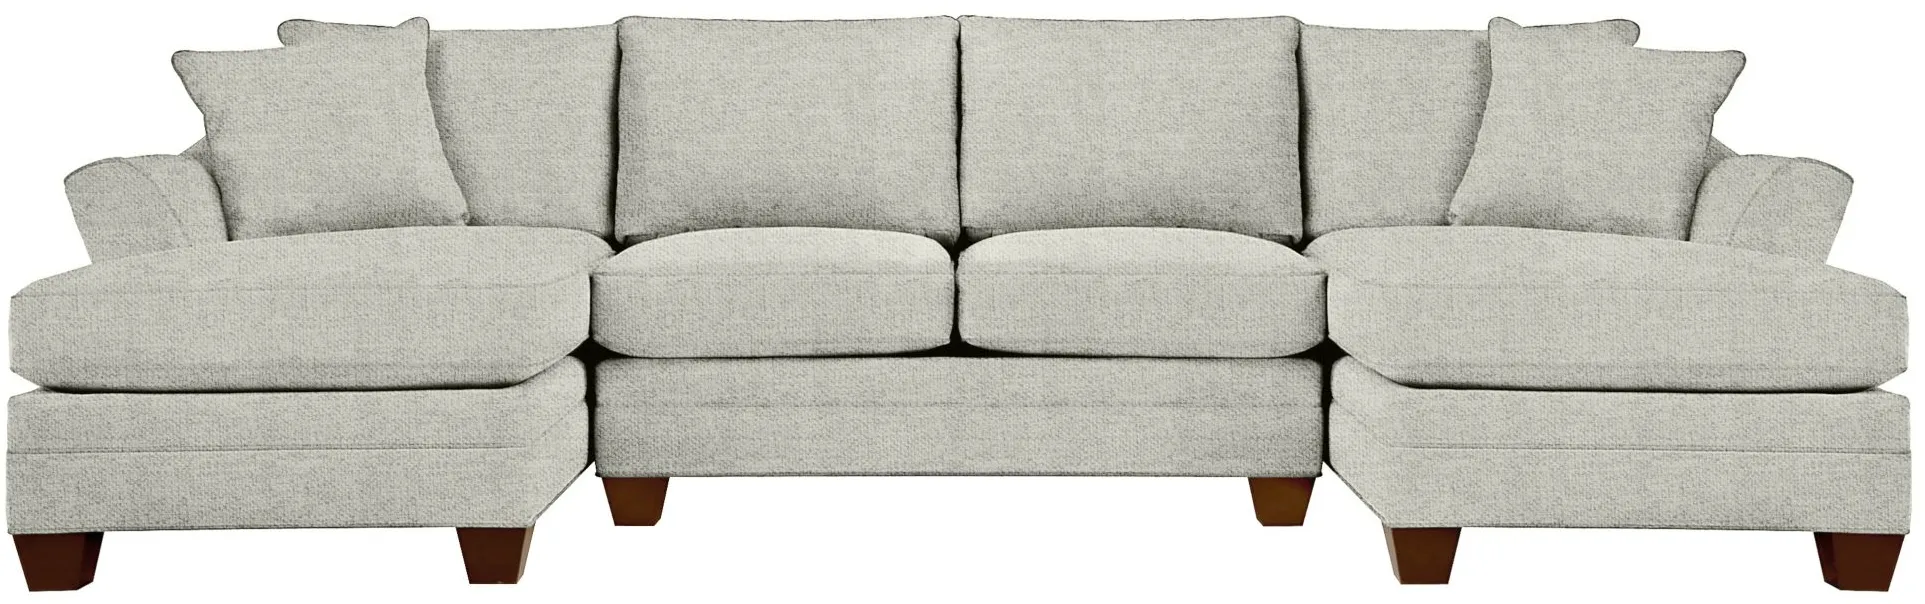 Foresthill 3-pc. Symmetrical Chaise Sectional Sofa in Elliot Smoke by H.M. Richards